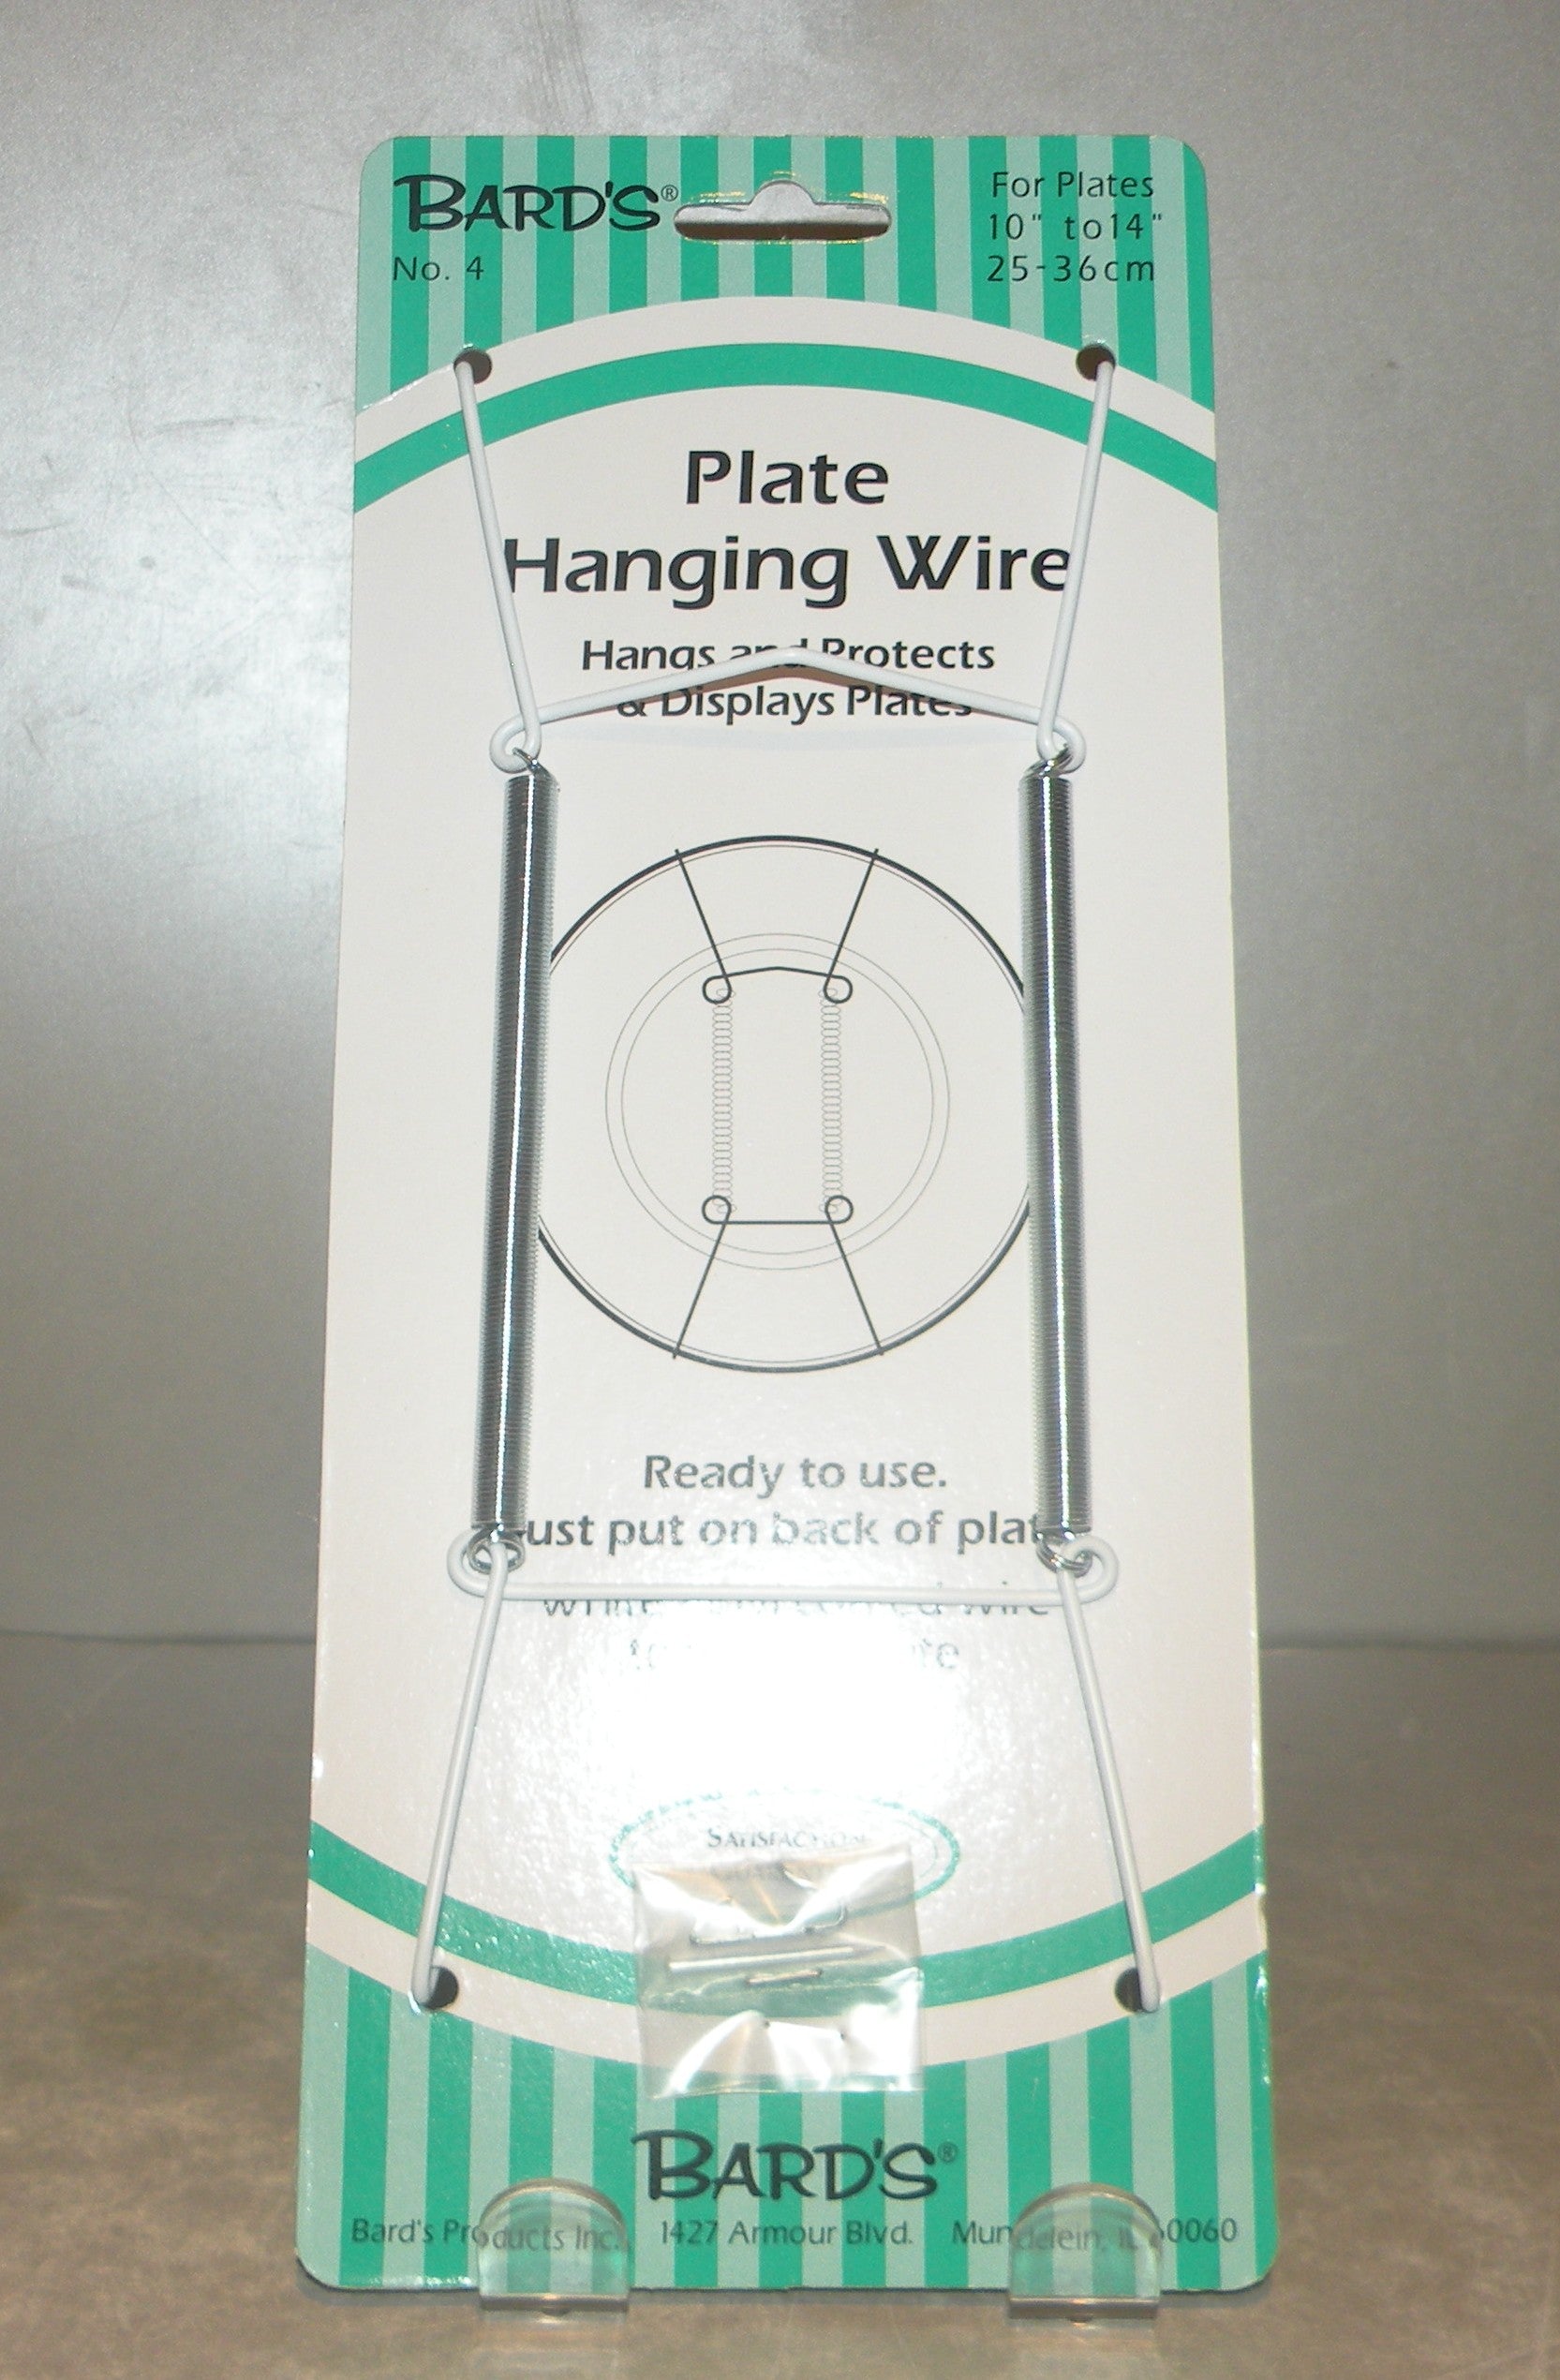 Plate Hanging Wire for plates 10 to 14 Inches